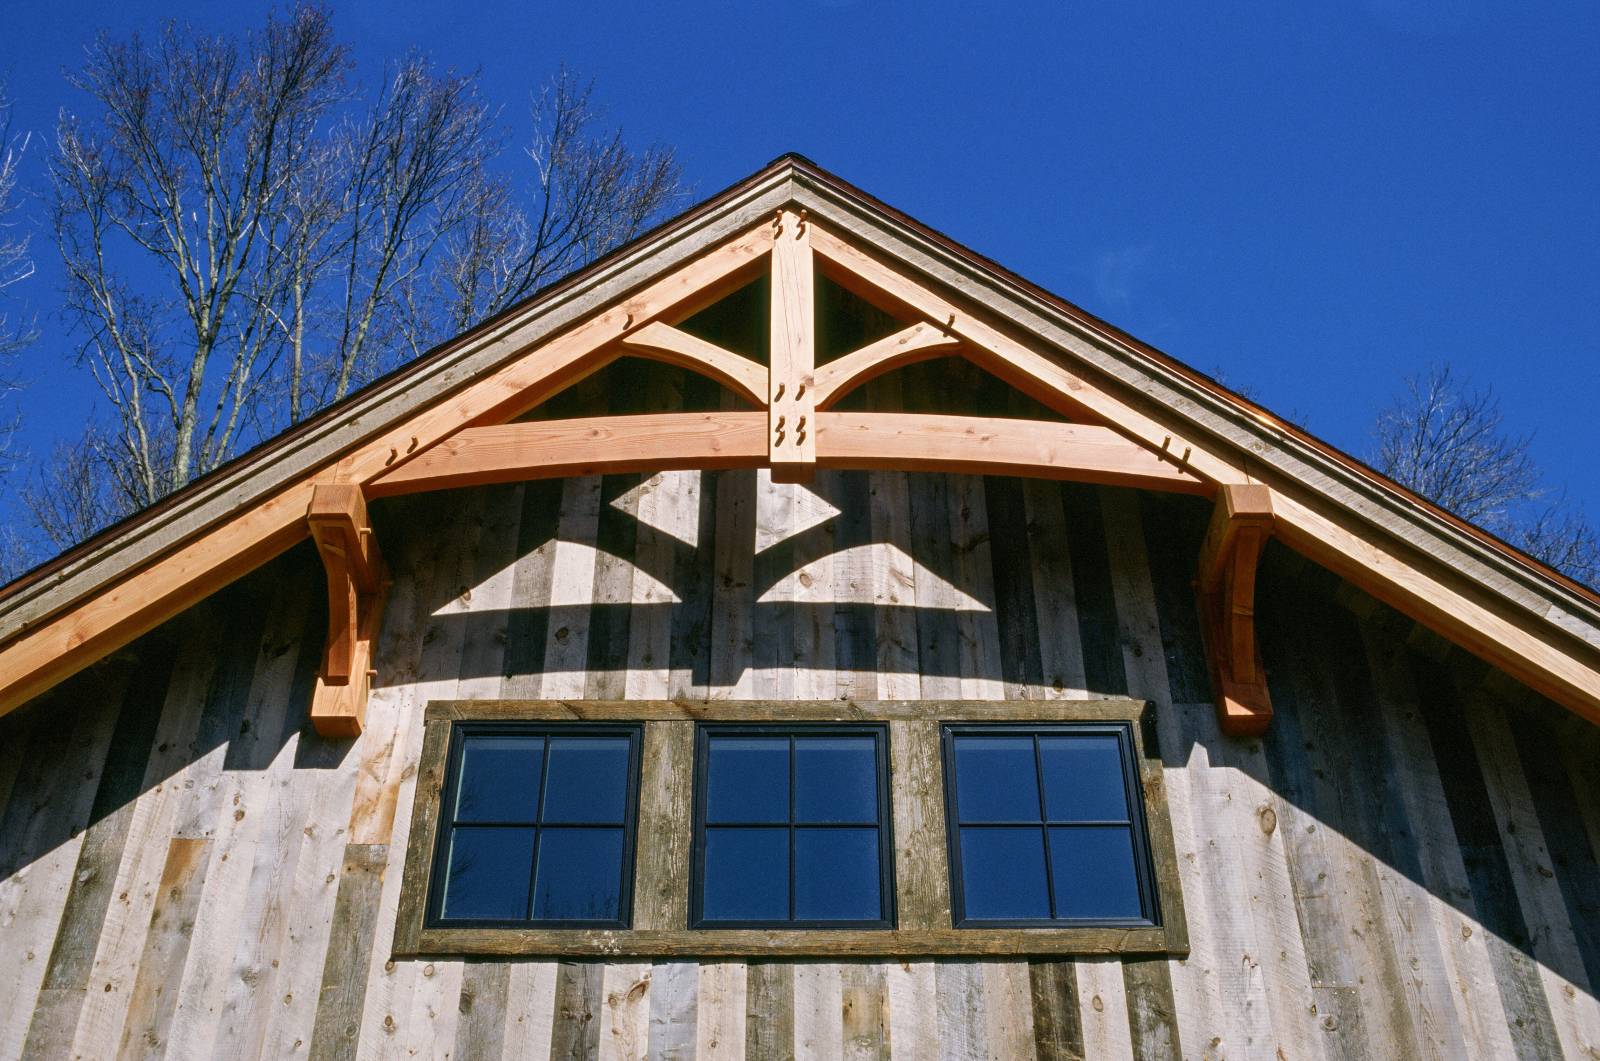 Douglas Fir Timber Frame Accents in the Gable